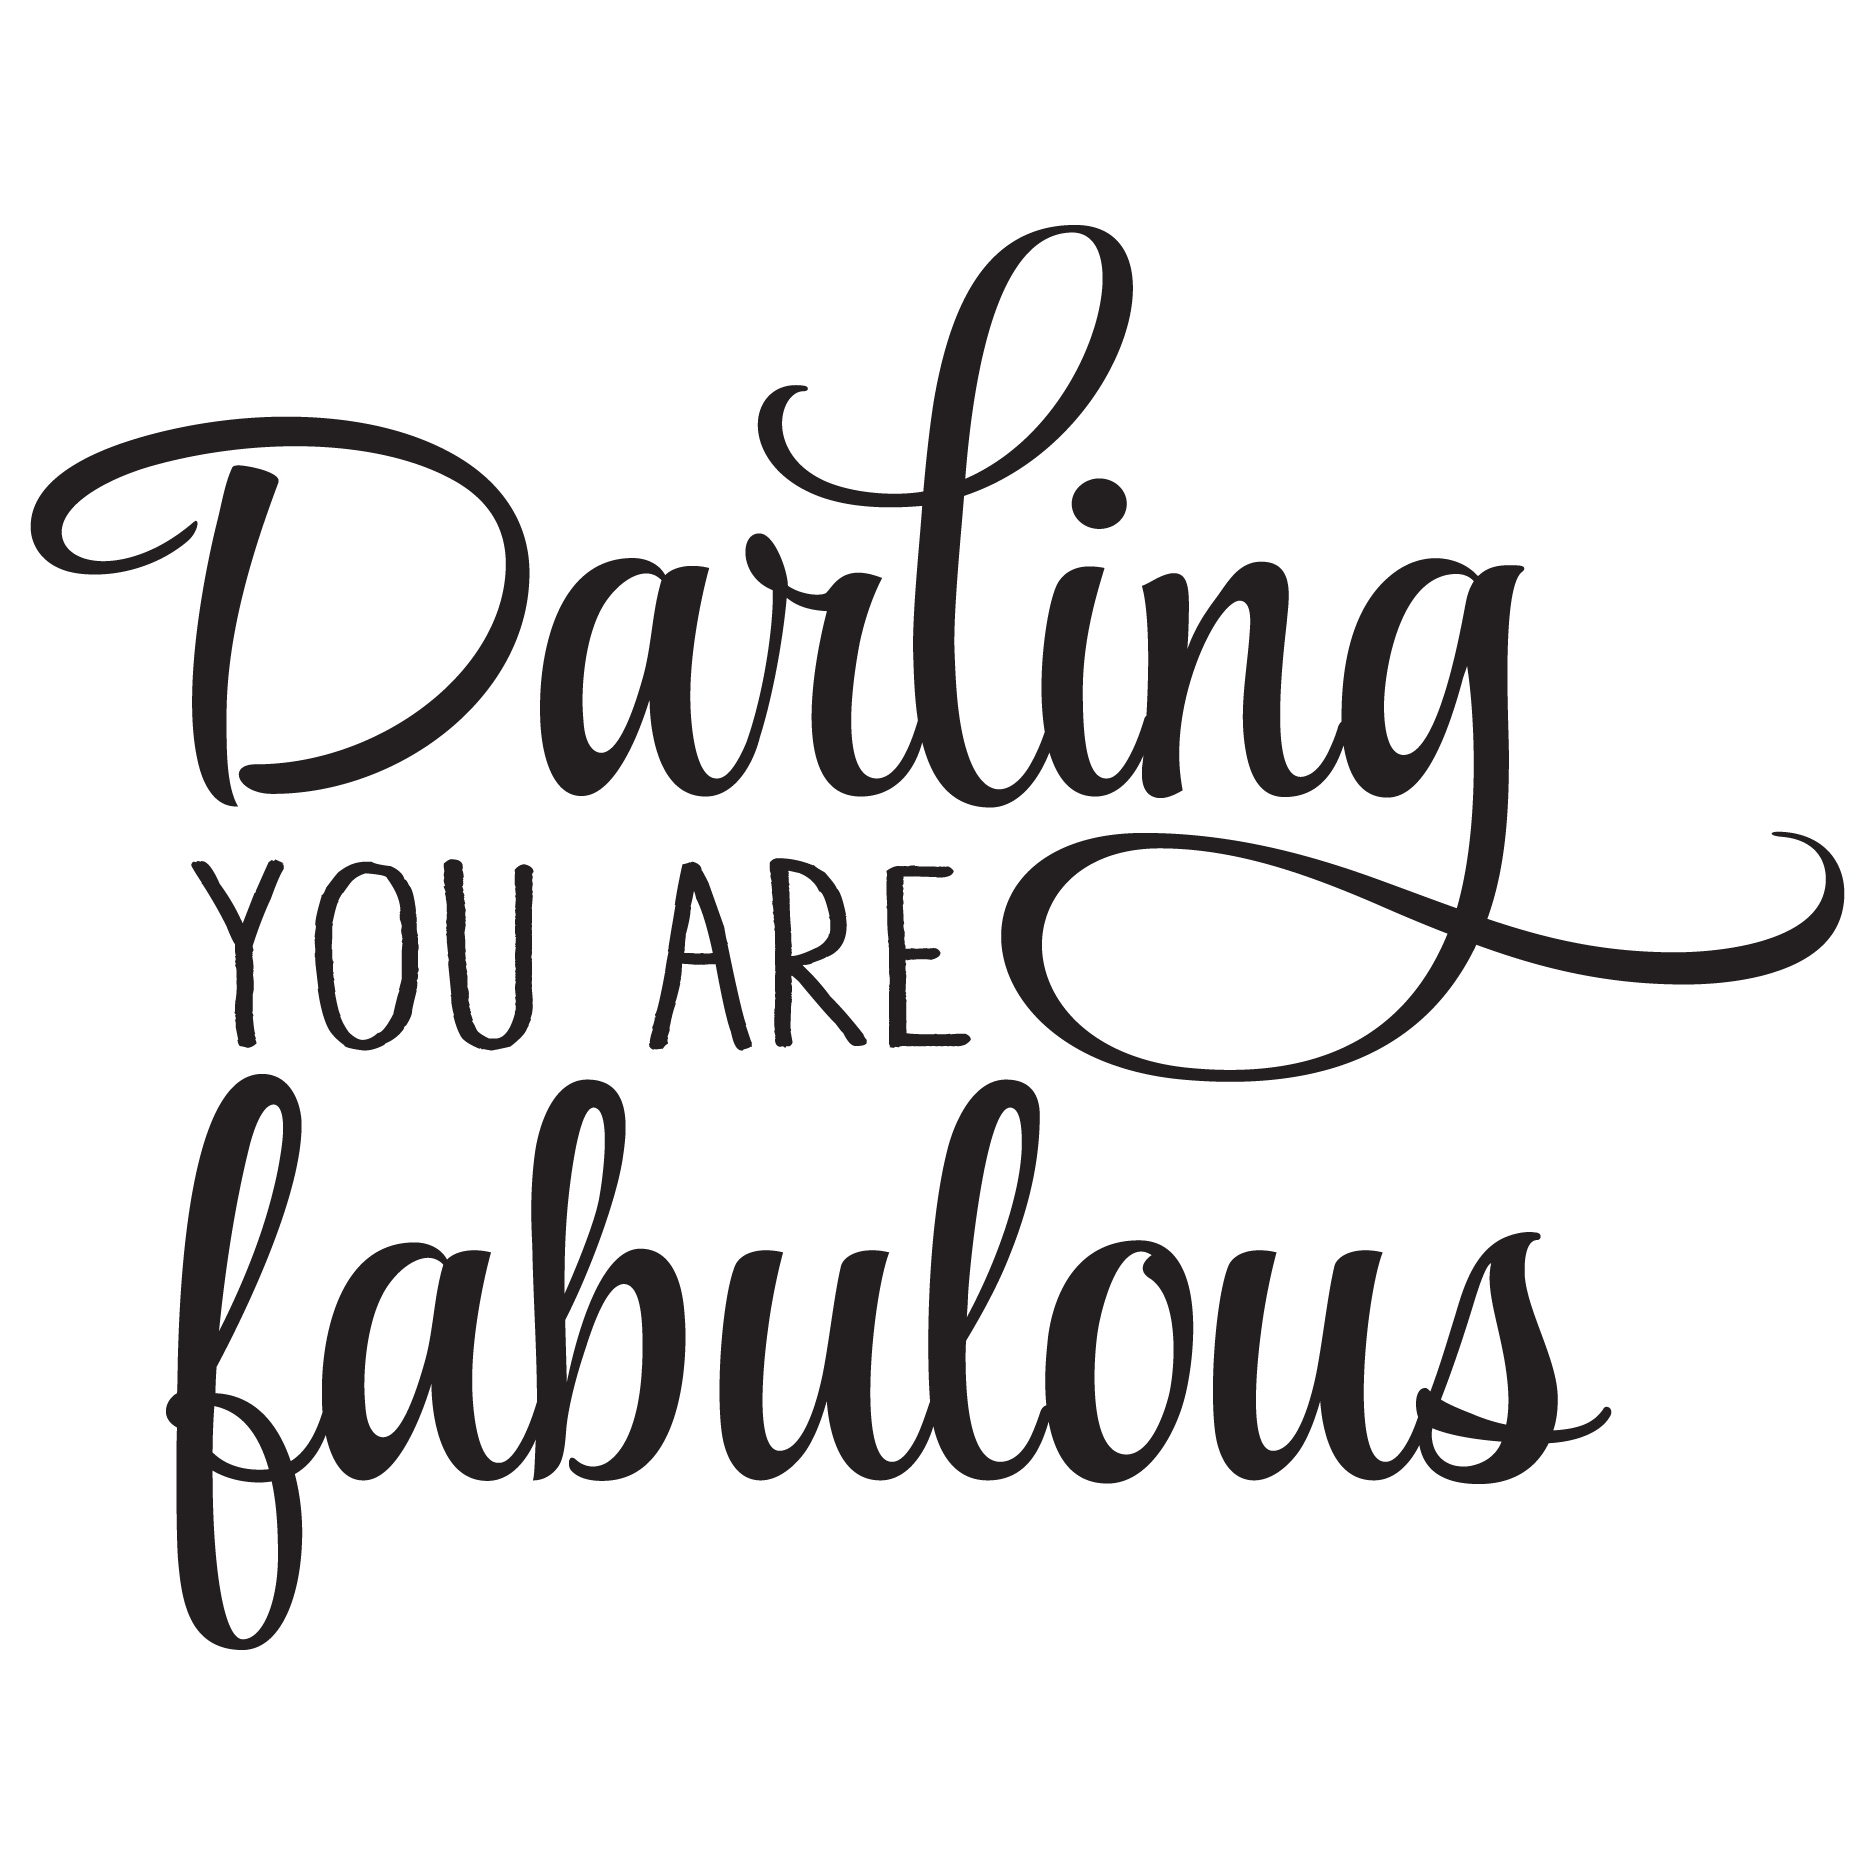 You Are Fabulous Clip Art